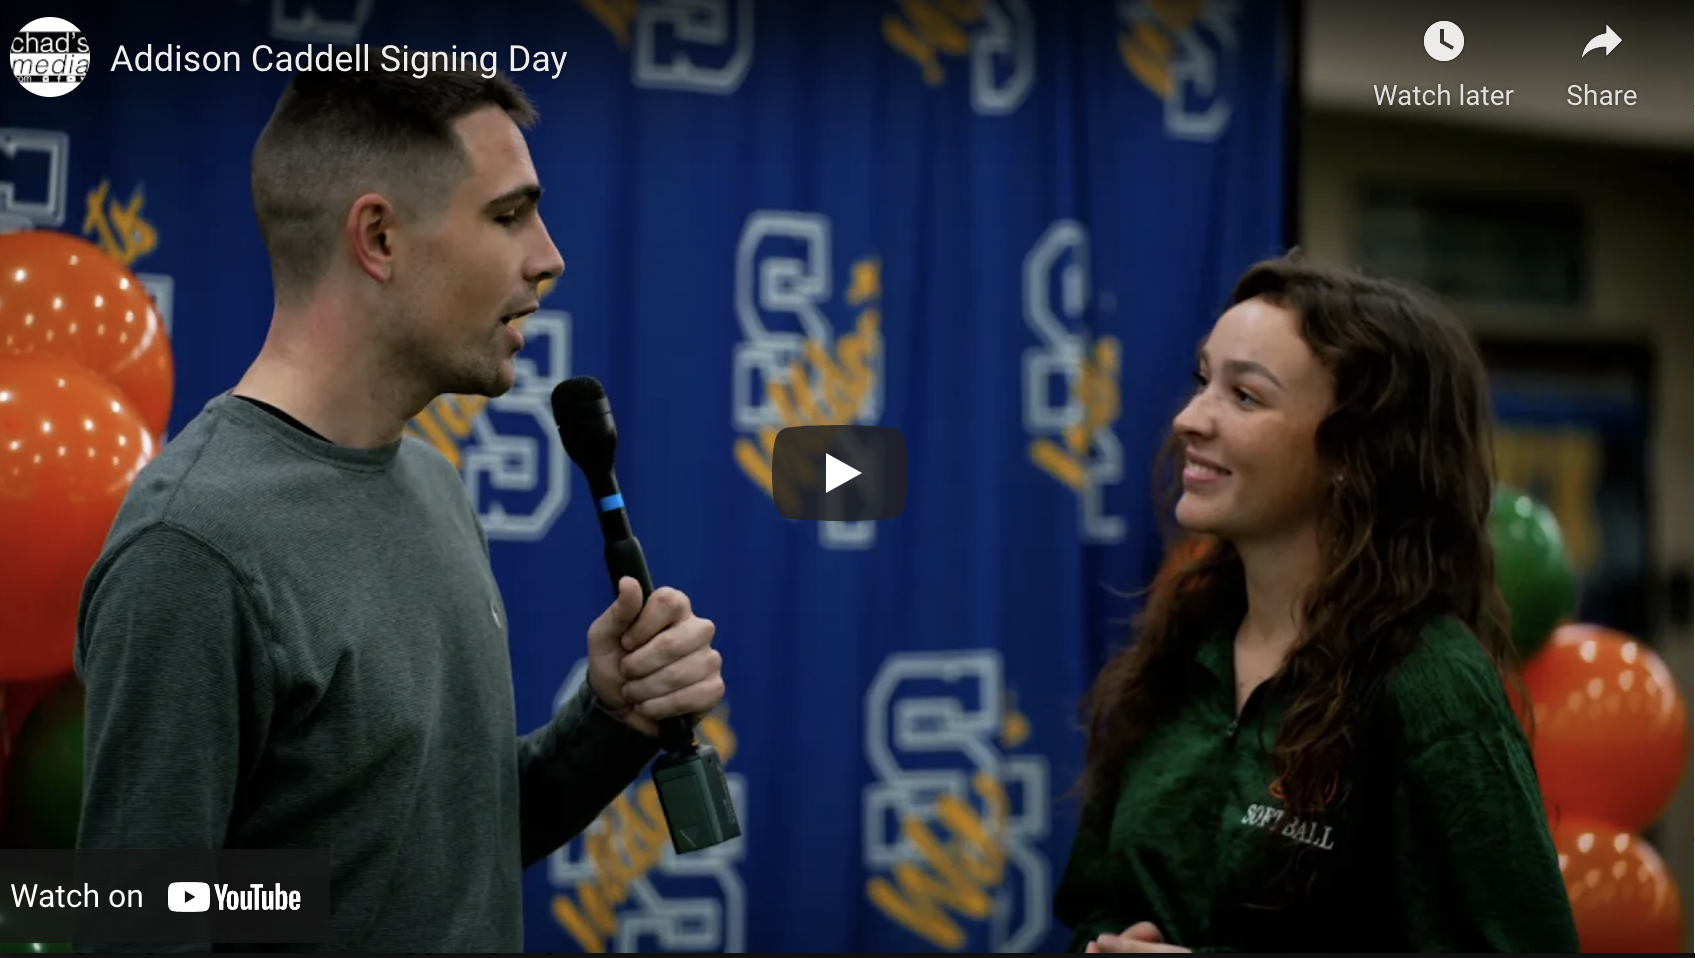 Signing Day interview with Addison Caddell